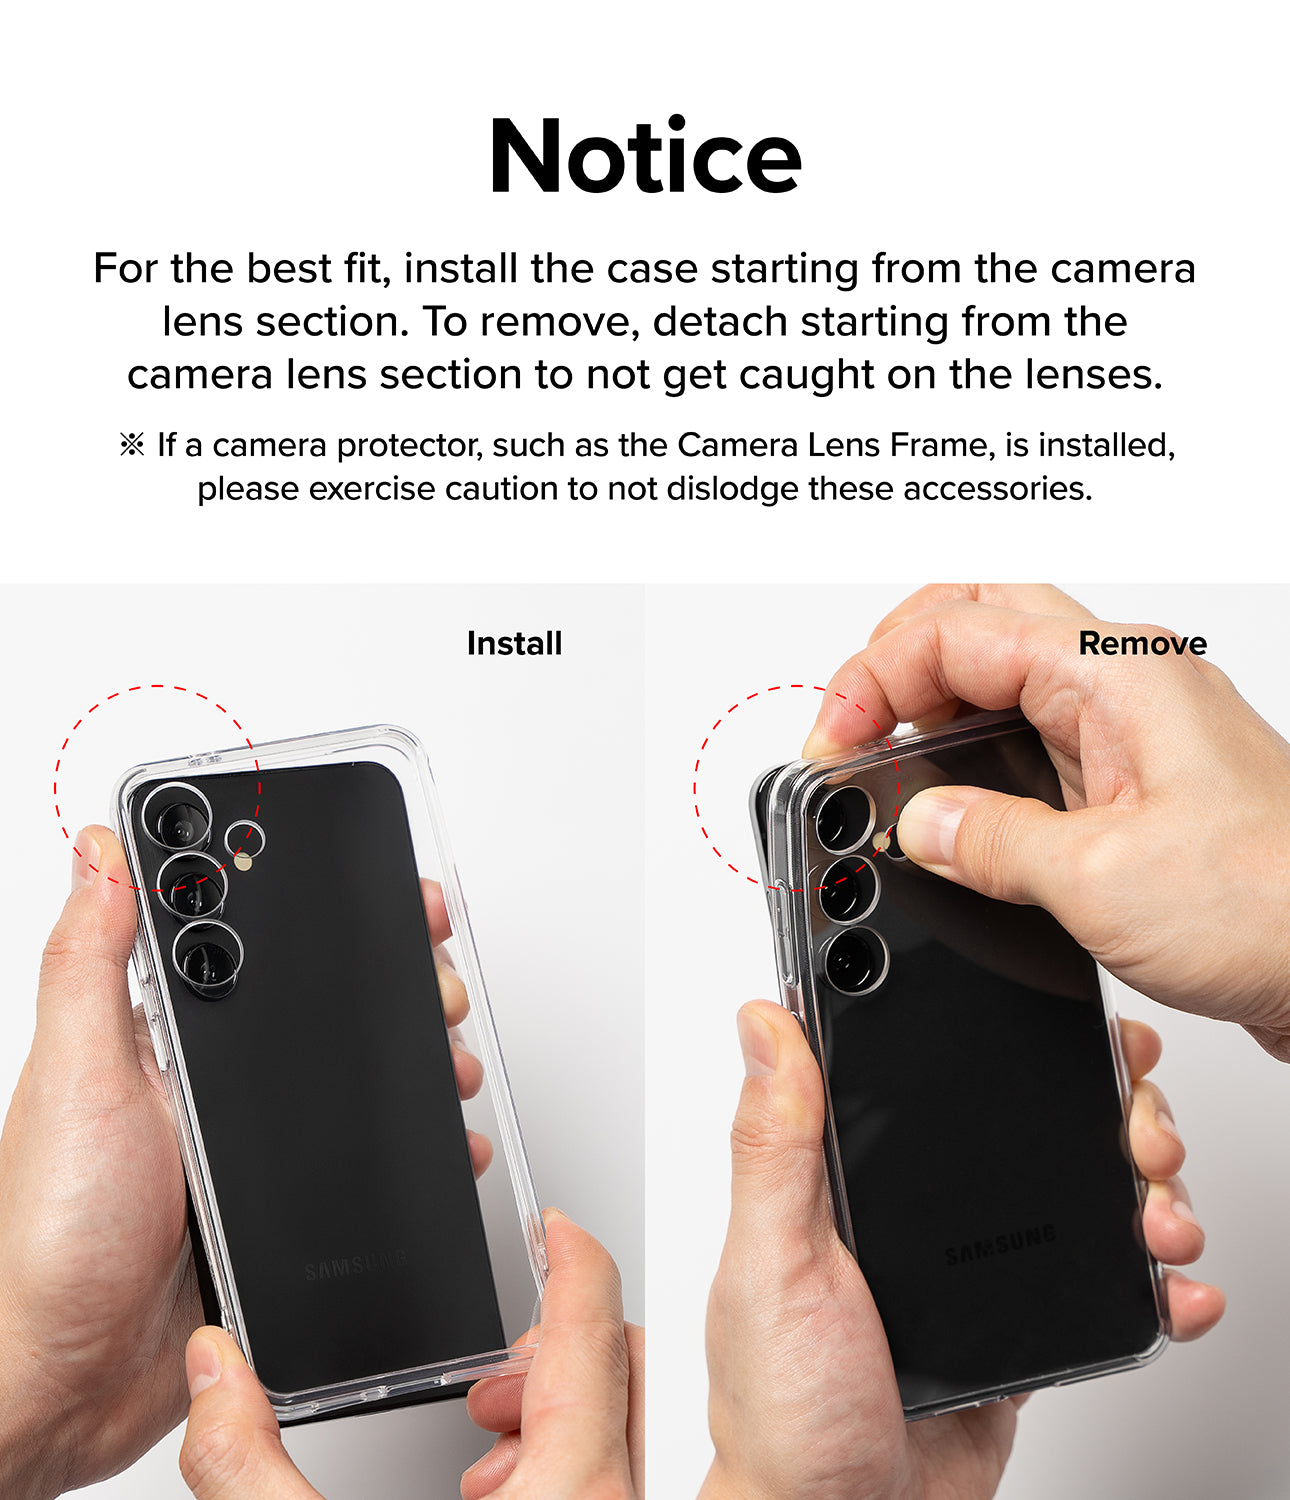 Google Pixel 8a Case | Fusion - Matte Clear - Notice. For the best fit, install the case starting from the camera lens section. To remove, detach starting from the camera lens section to not get caught on the lenses.